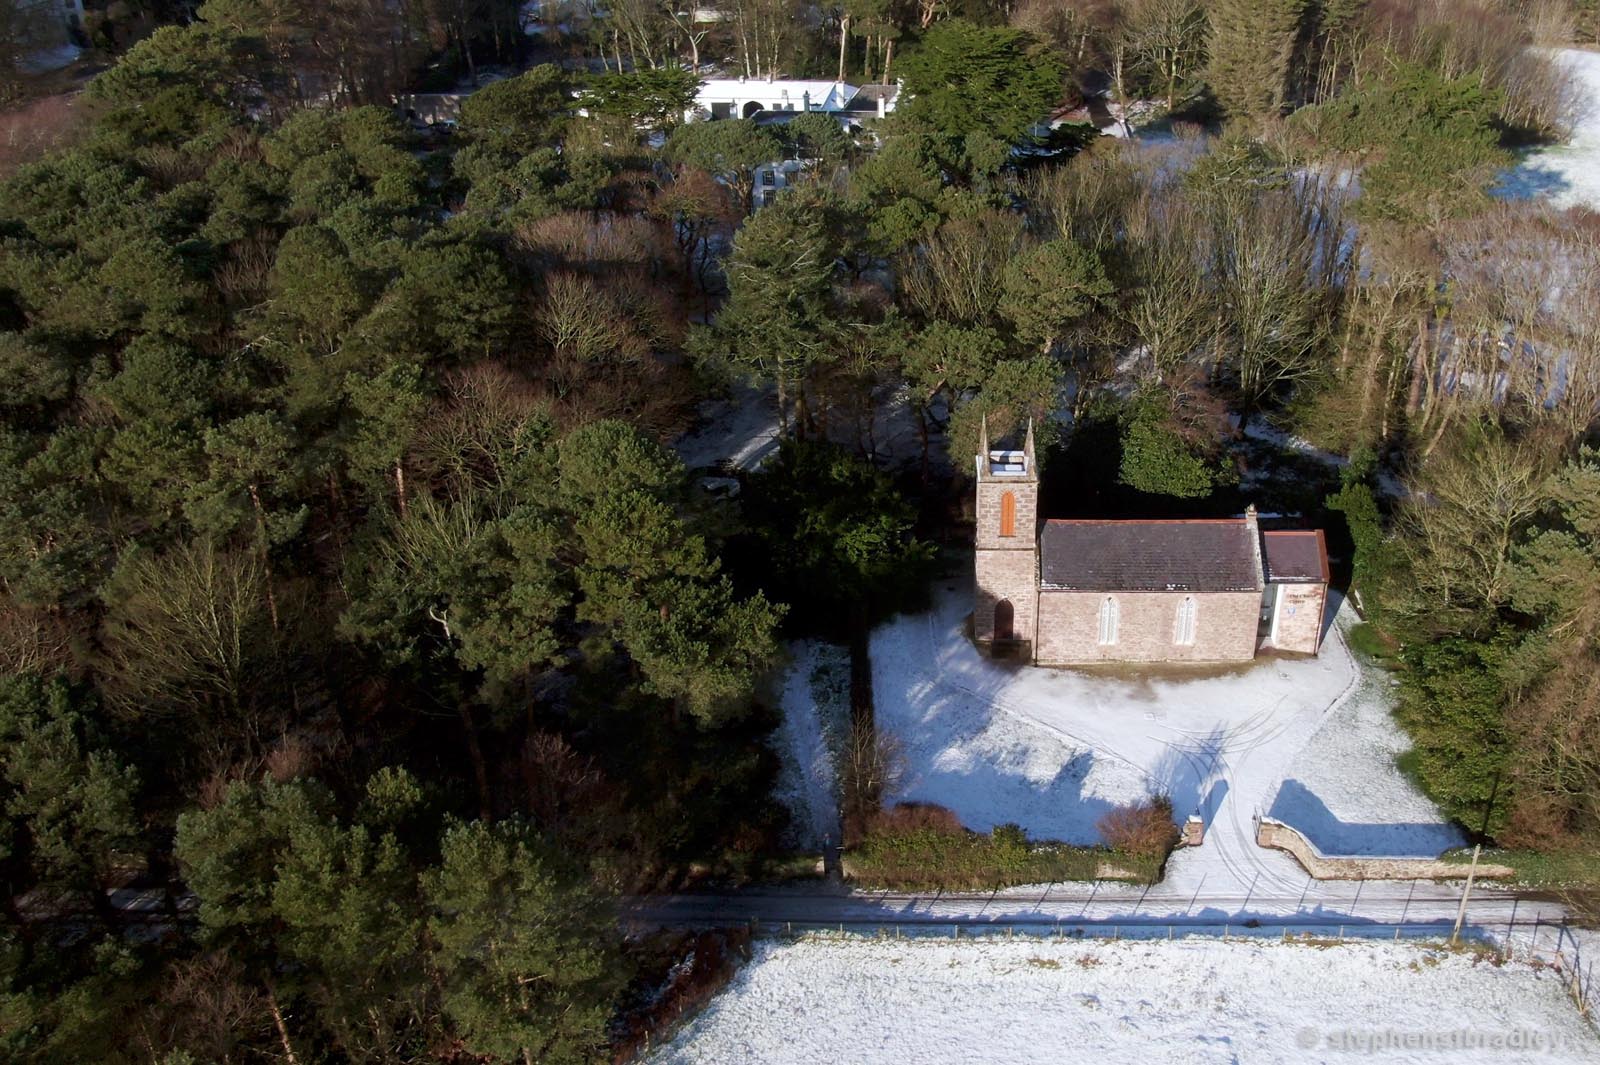 Aerial drone photography and video production services Dublin and Ireland portfolio - Cushendun village under snow in winter, video screenshot 1